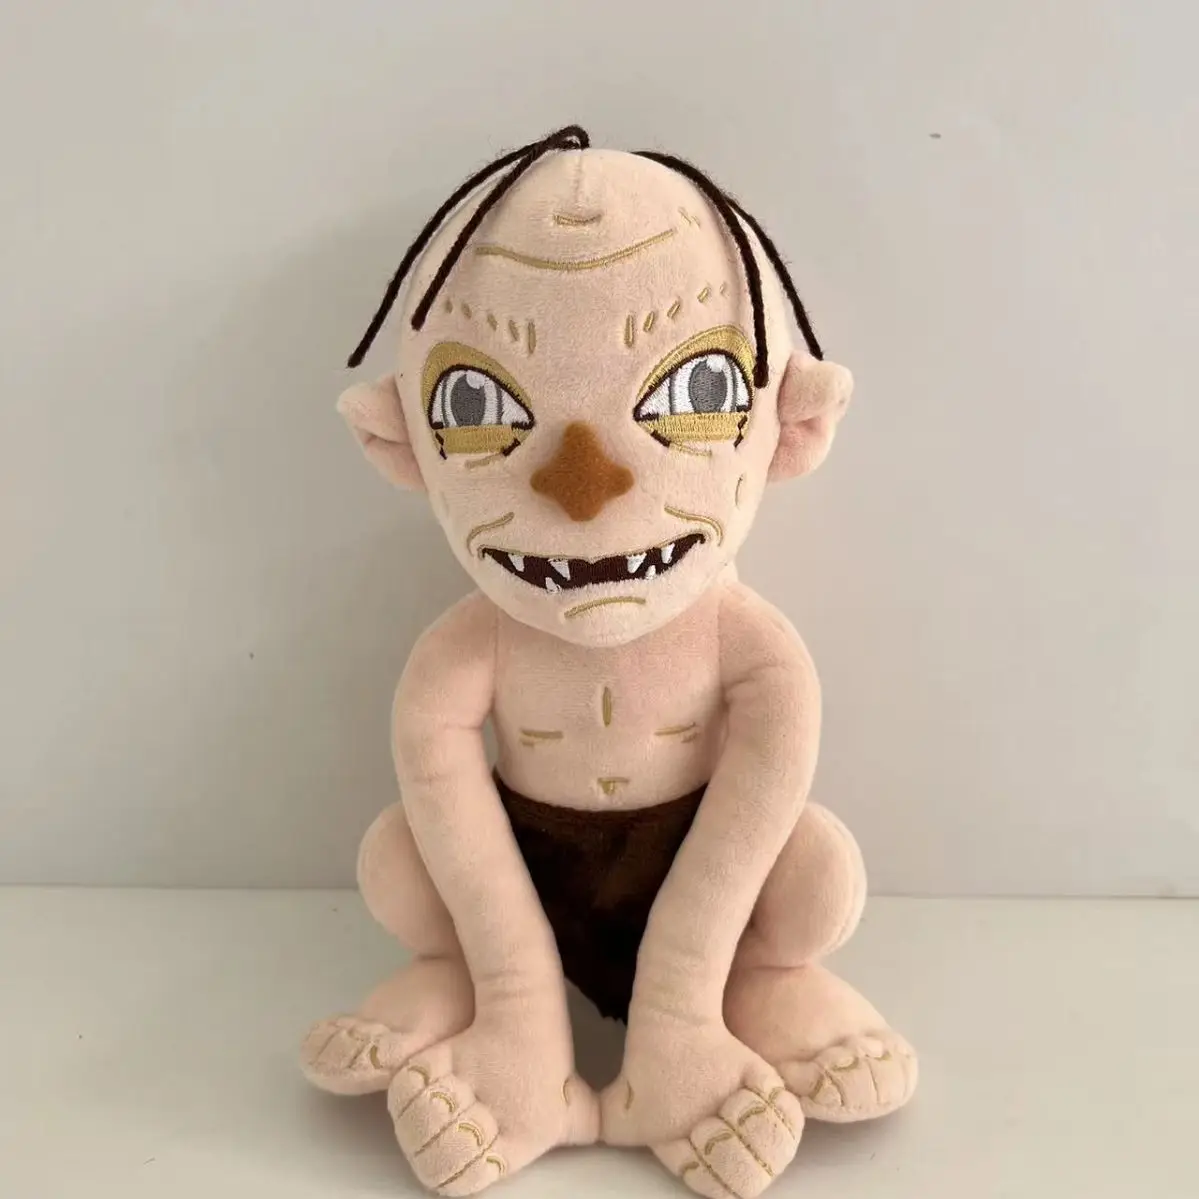 

23cm The Lord of the Rings Plush Toys Cute Soft Stuffed Anime Gollum Dolls For Kid Birthday Christmas Gift